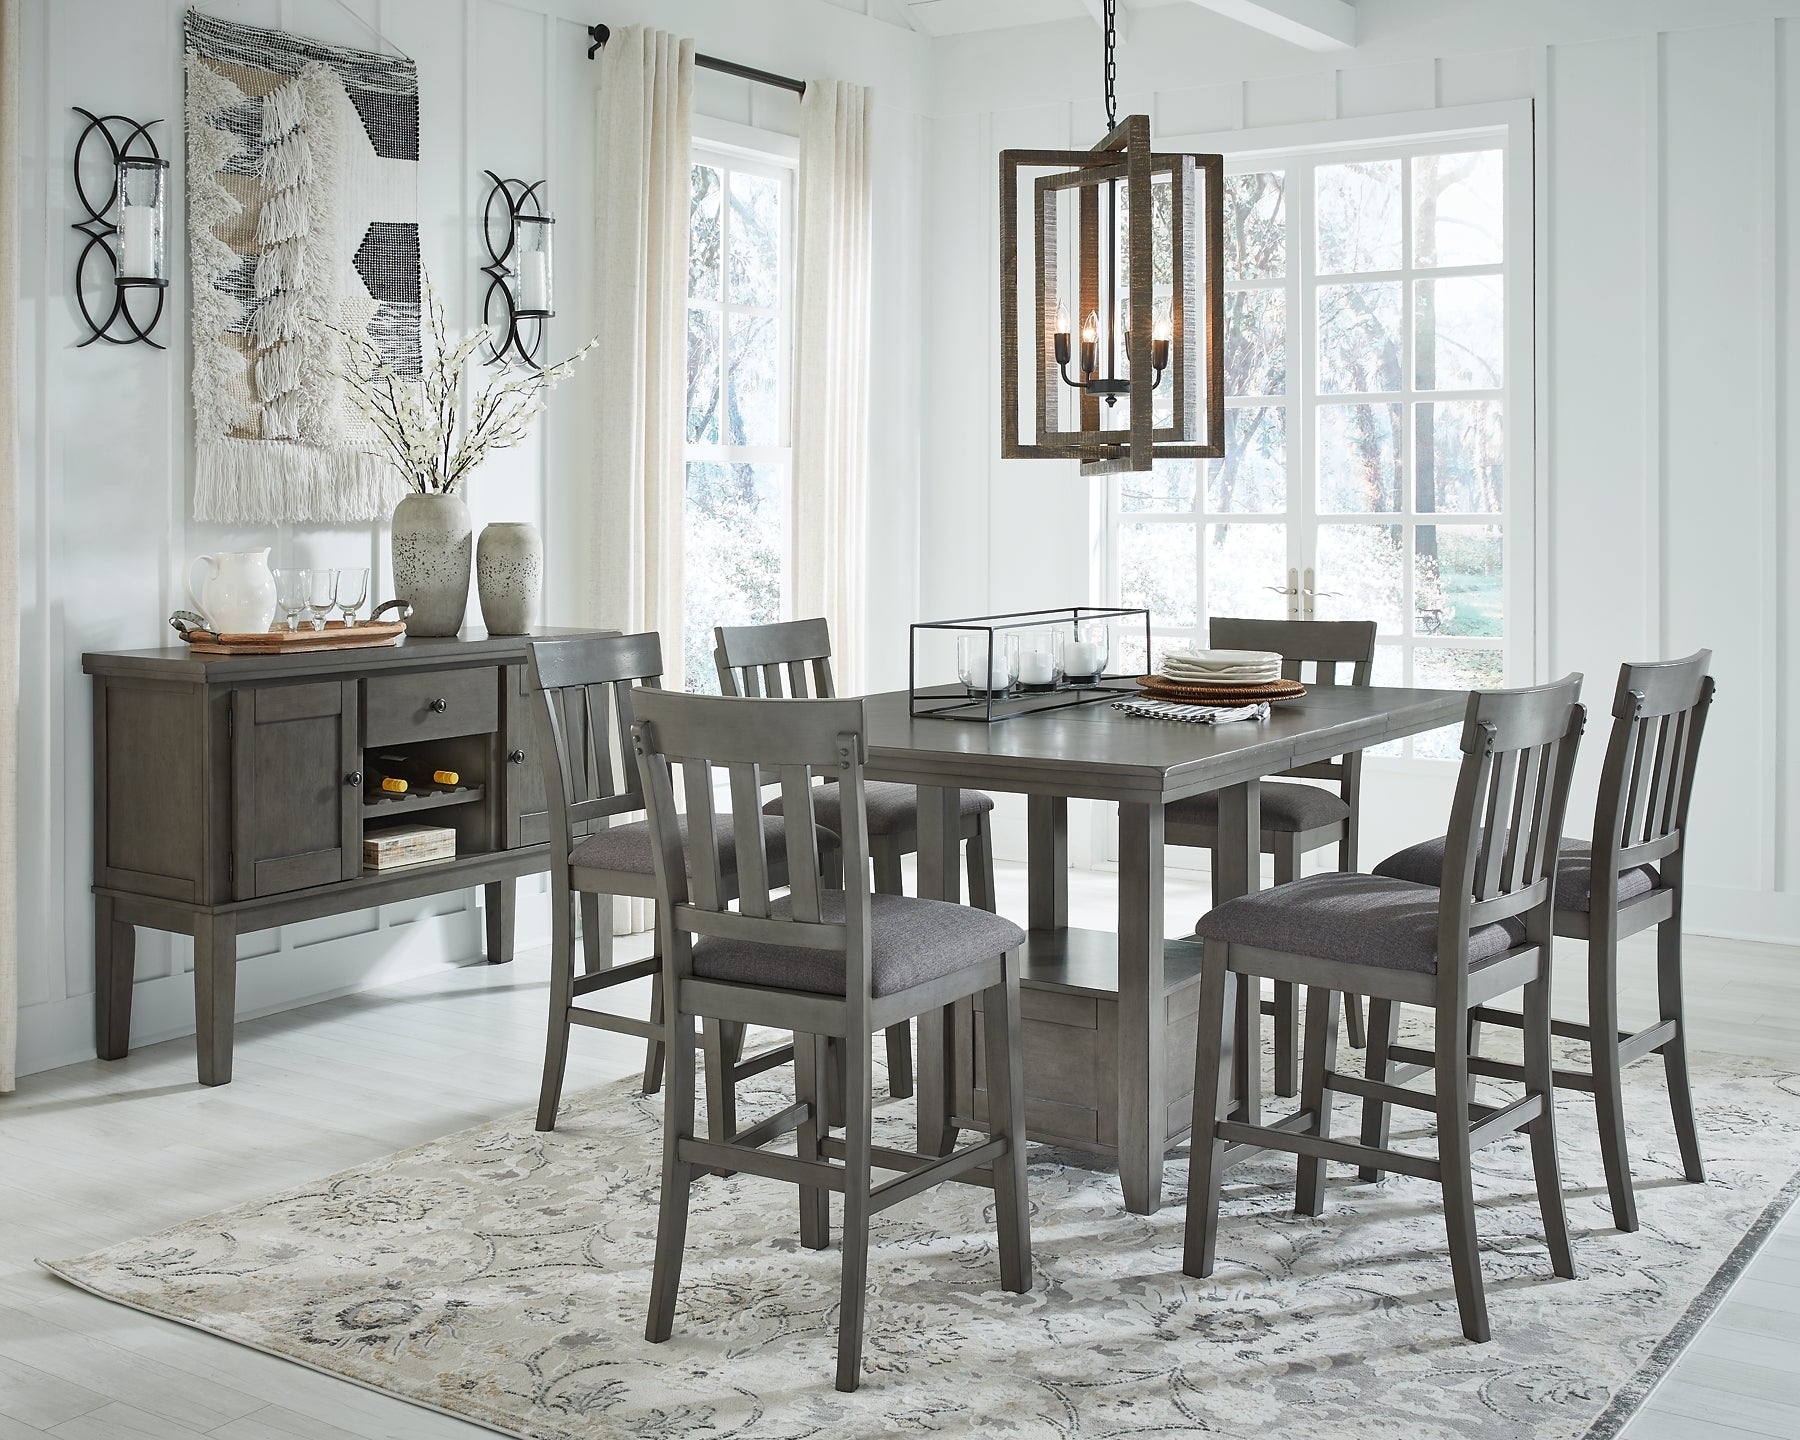 Hallanden Counter Height Dining Table and 6 Barstools with Storage Wilson Furniture (OH)  in Bridgeport, Ohio. Serving Bridgeport, Yorkville, Bellaire, & Avondale